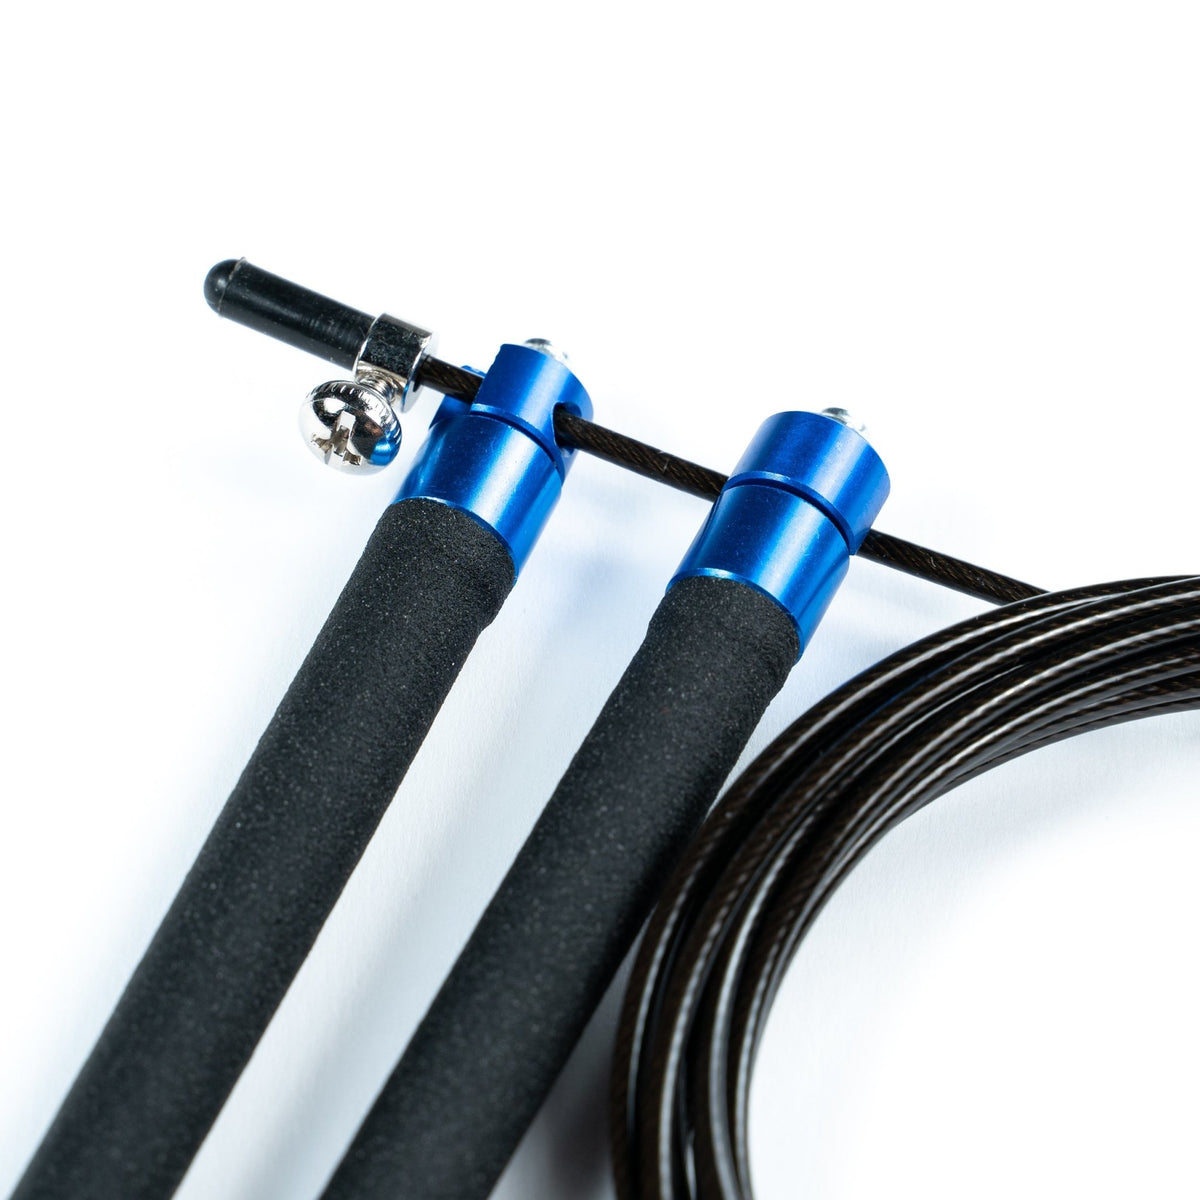 FitWay Equip. FitWay Aluminum Grip Speed Rope - Fitness Experience